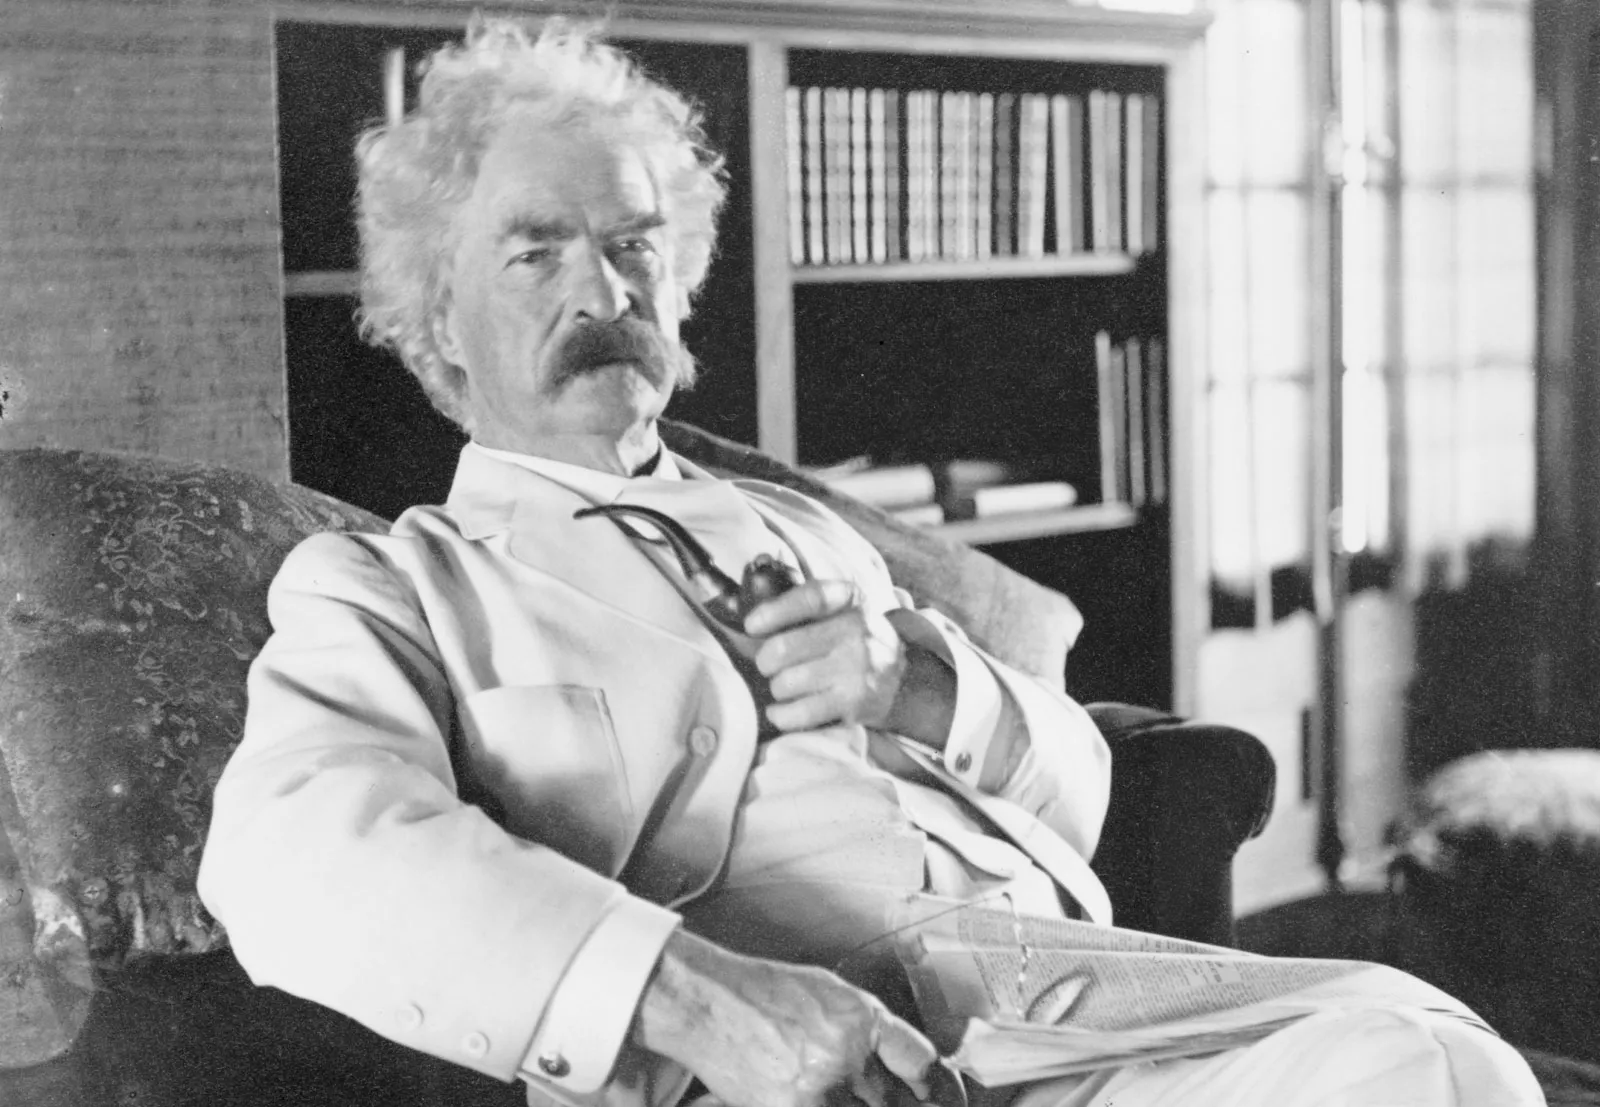 Mark Twain was a successful author during his prime